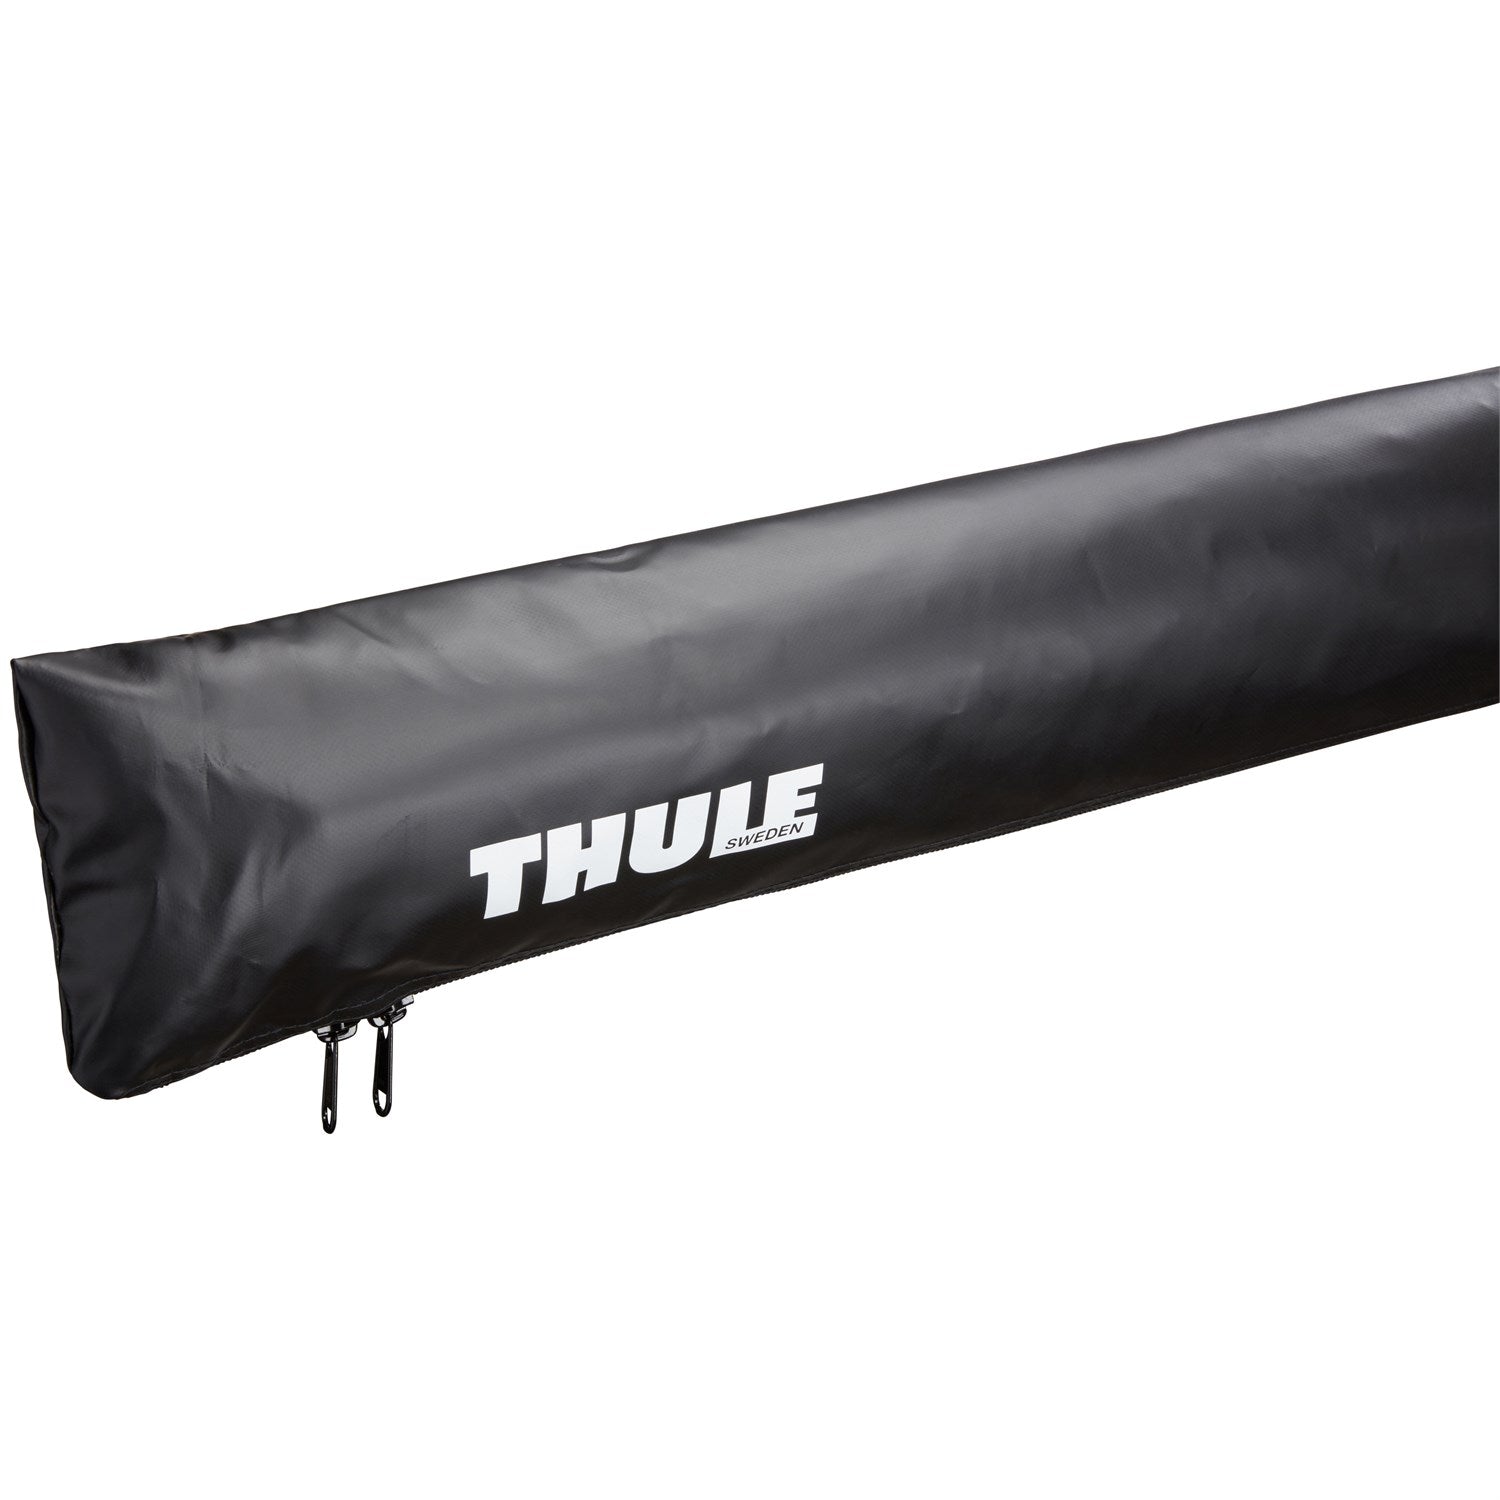 Thule Thule OverCast Awning- 6.5'